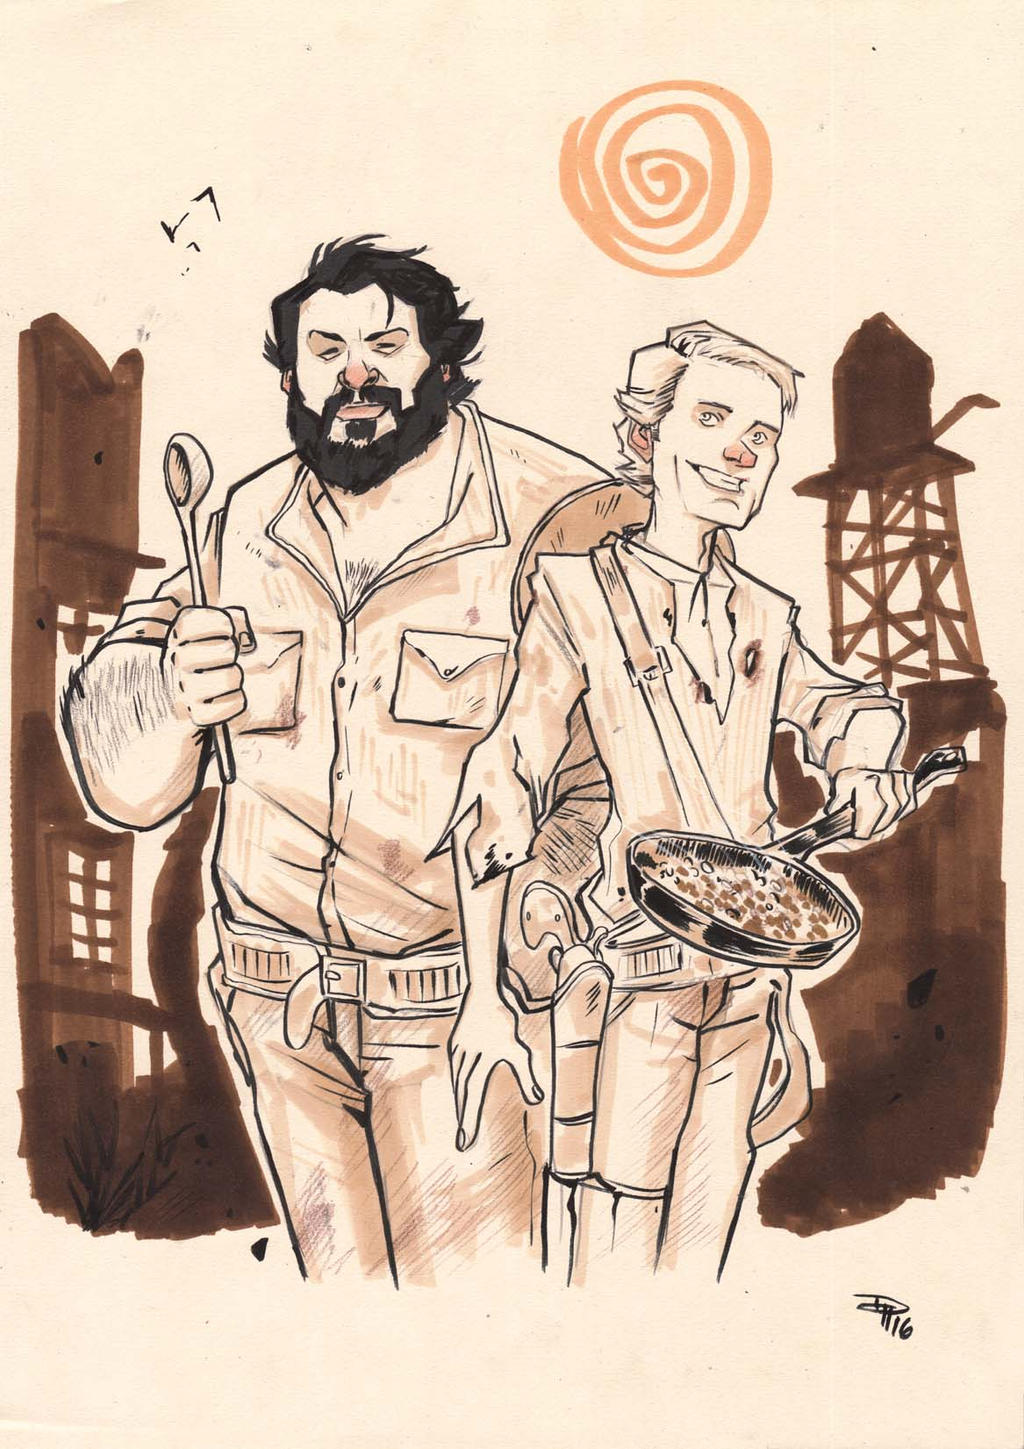 Bud Spencer and Terence Hill - commission by DenisM79 on DeviantArt